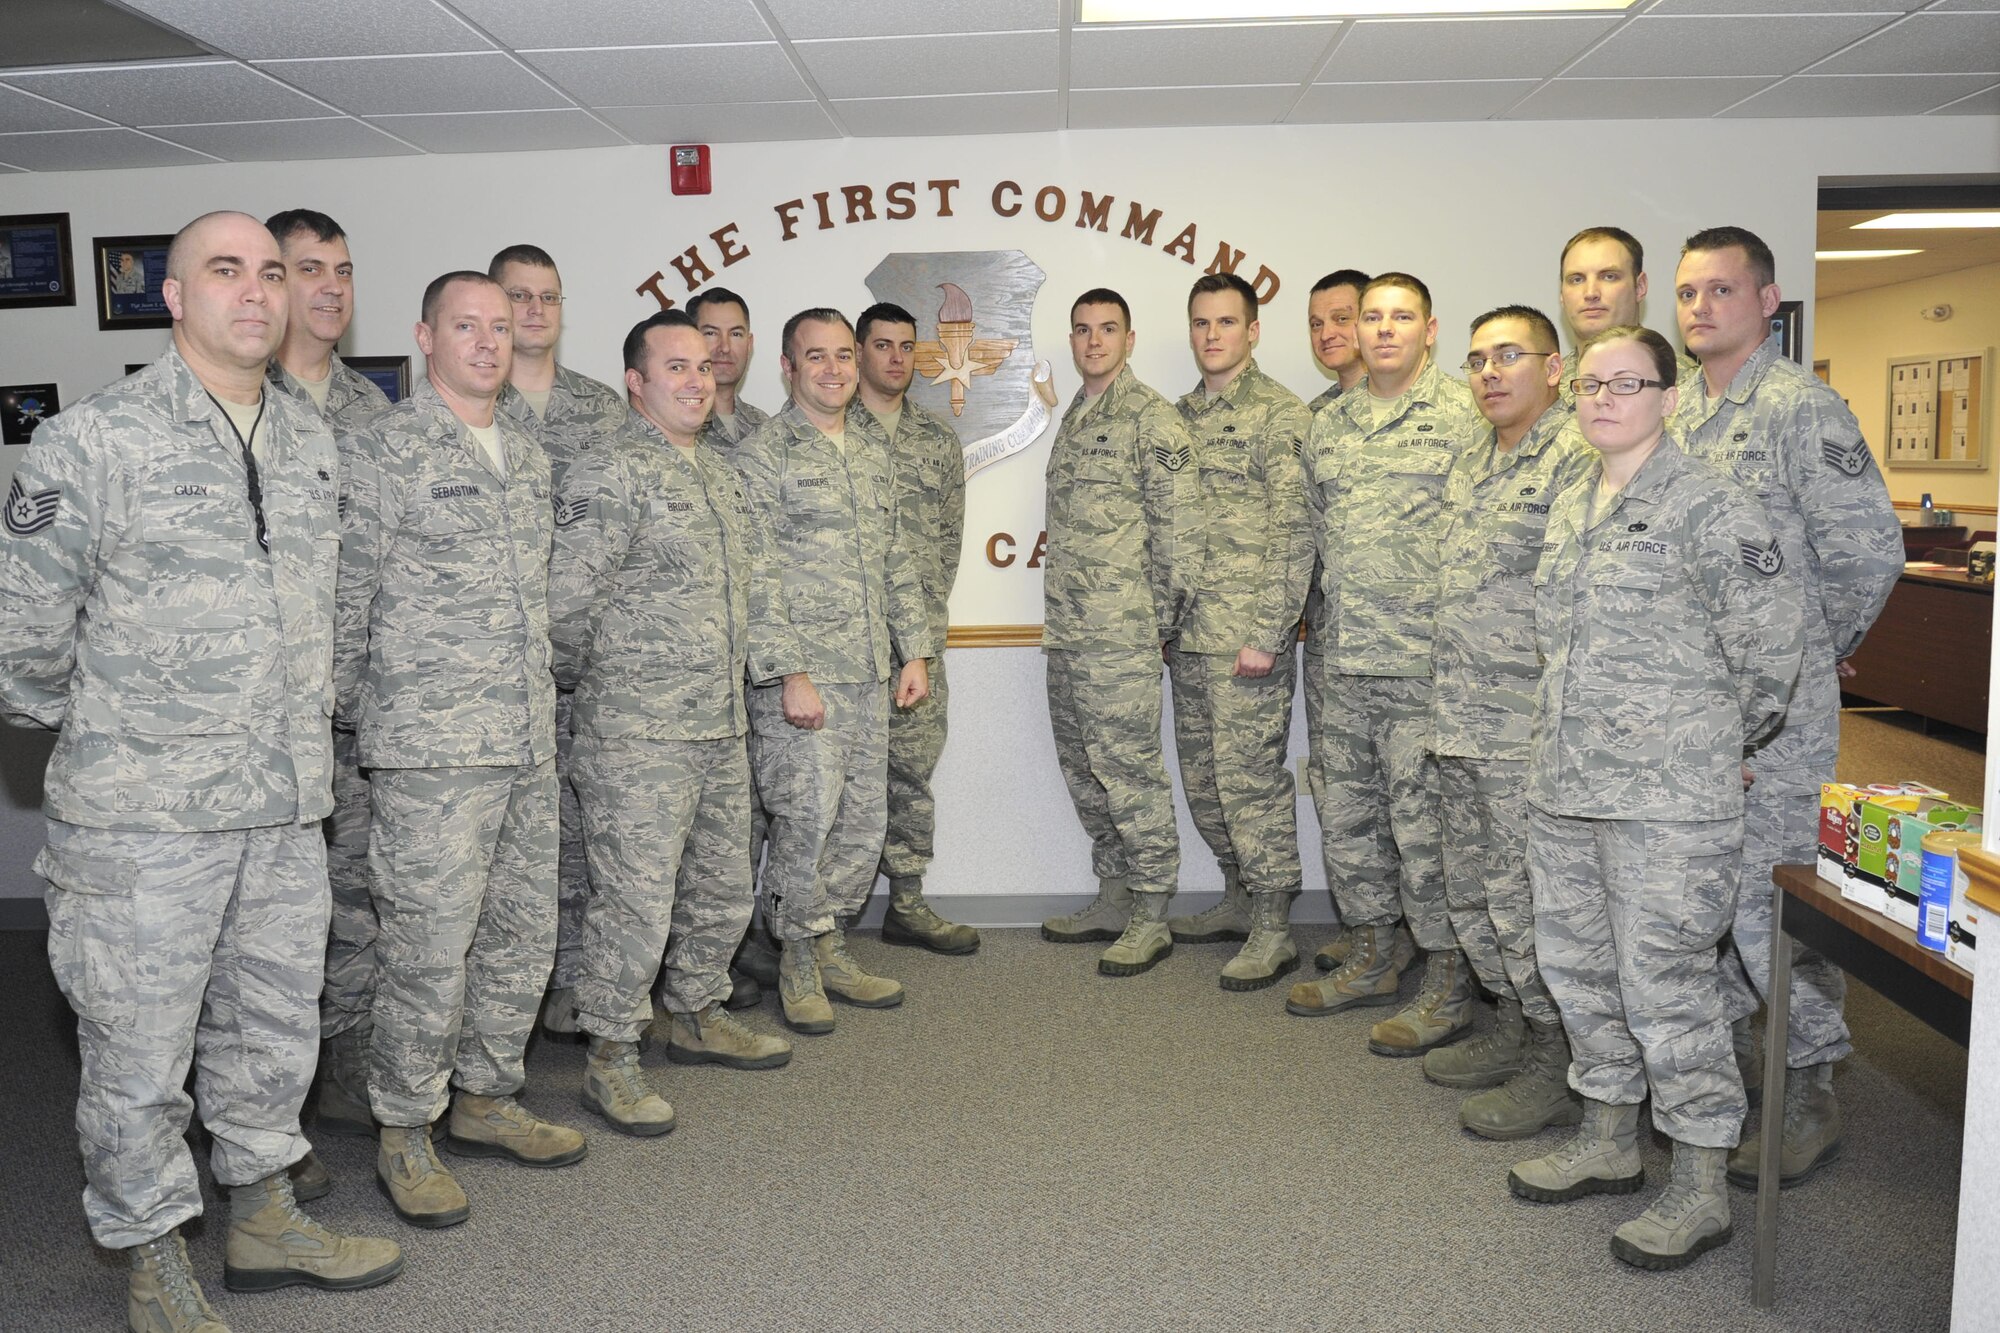 The 373rd Training Squadron, Detachment 13, staff pose for a group photo Feb. 13, 2015, at Fairchild Air Force Base, Wash. Detachment 13 specializes in hands on training supporting the 92nd Maintenance Group and offers more than 46 aircraft maintenance courses. (U.S. Air Force photo/Airman 1st Class Nicolo J. Daniello) 